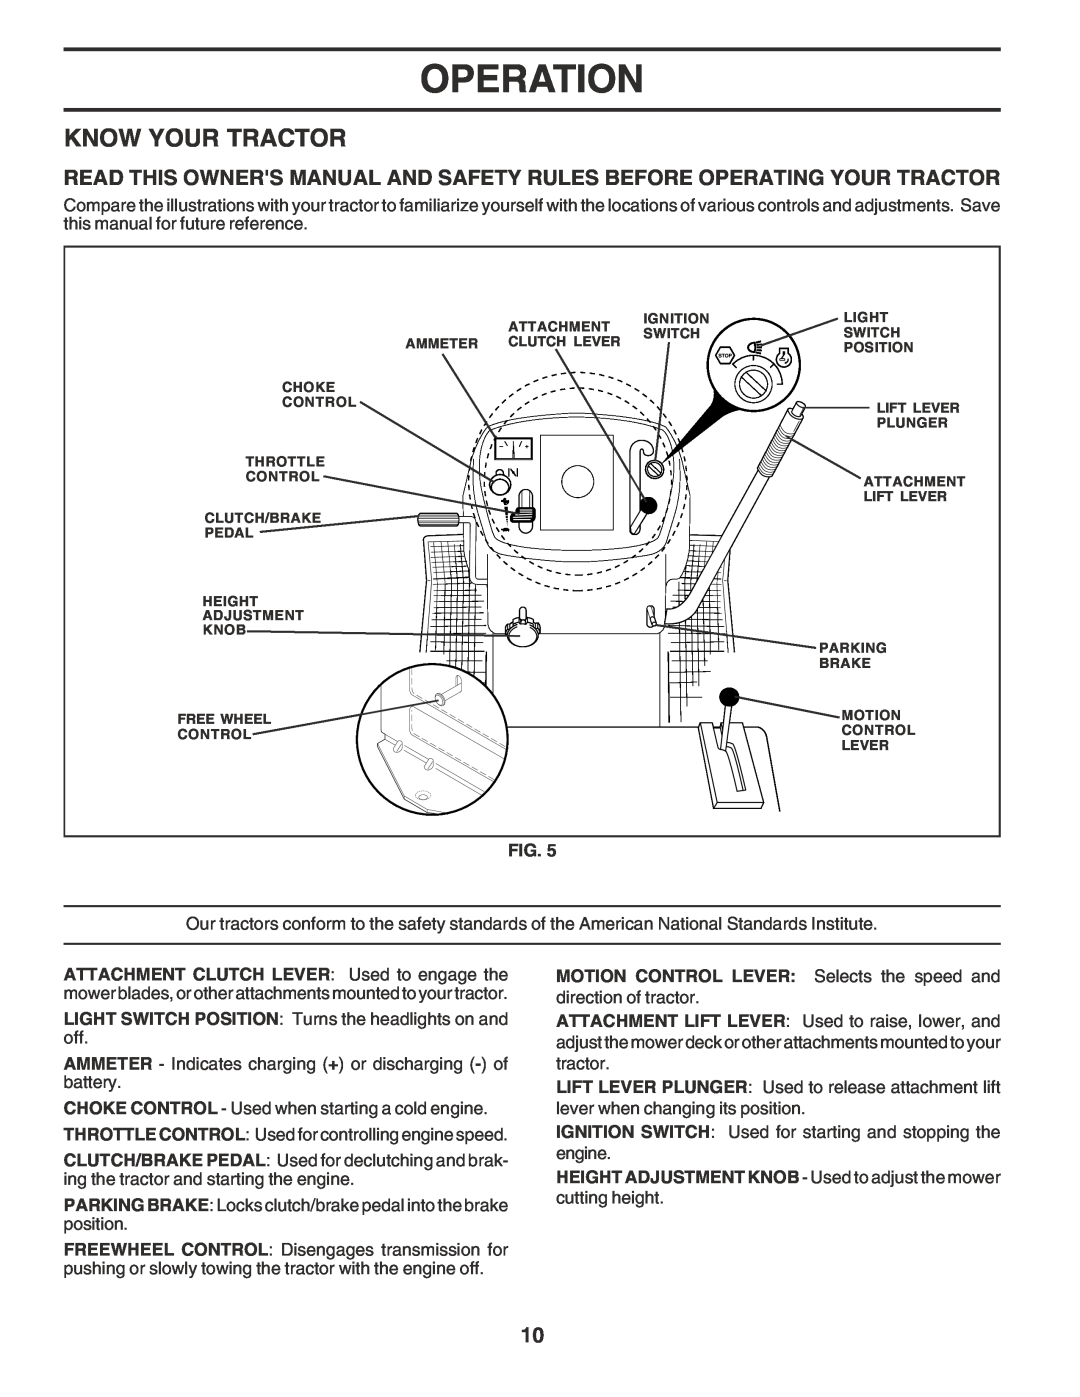 Poulan PR185H42STH owner manual Know Your Tractor, Operation 